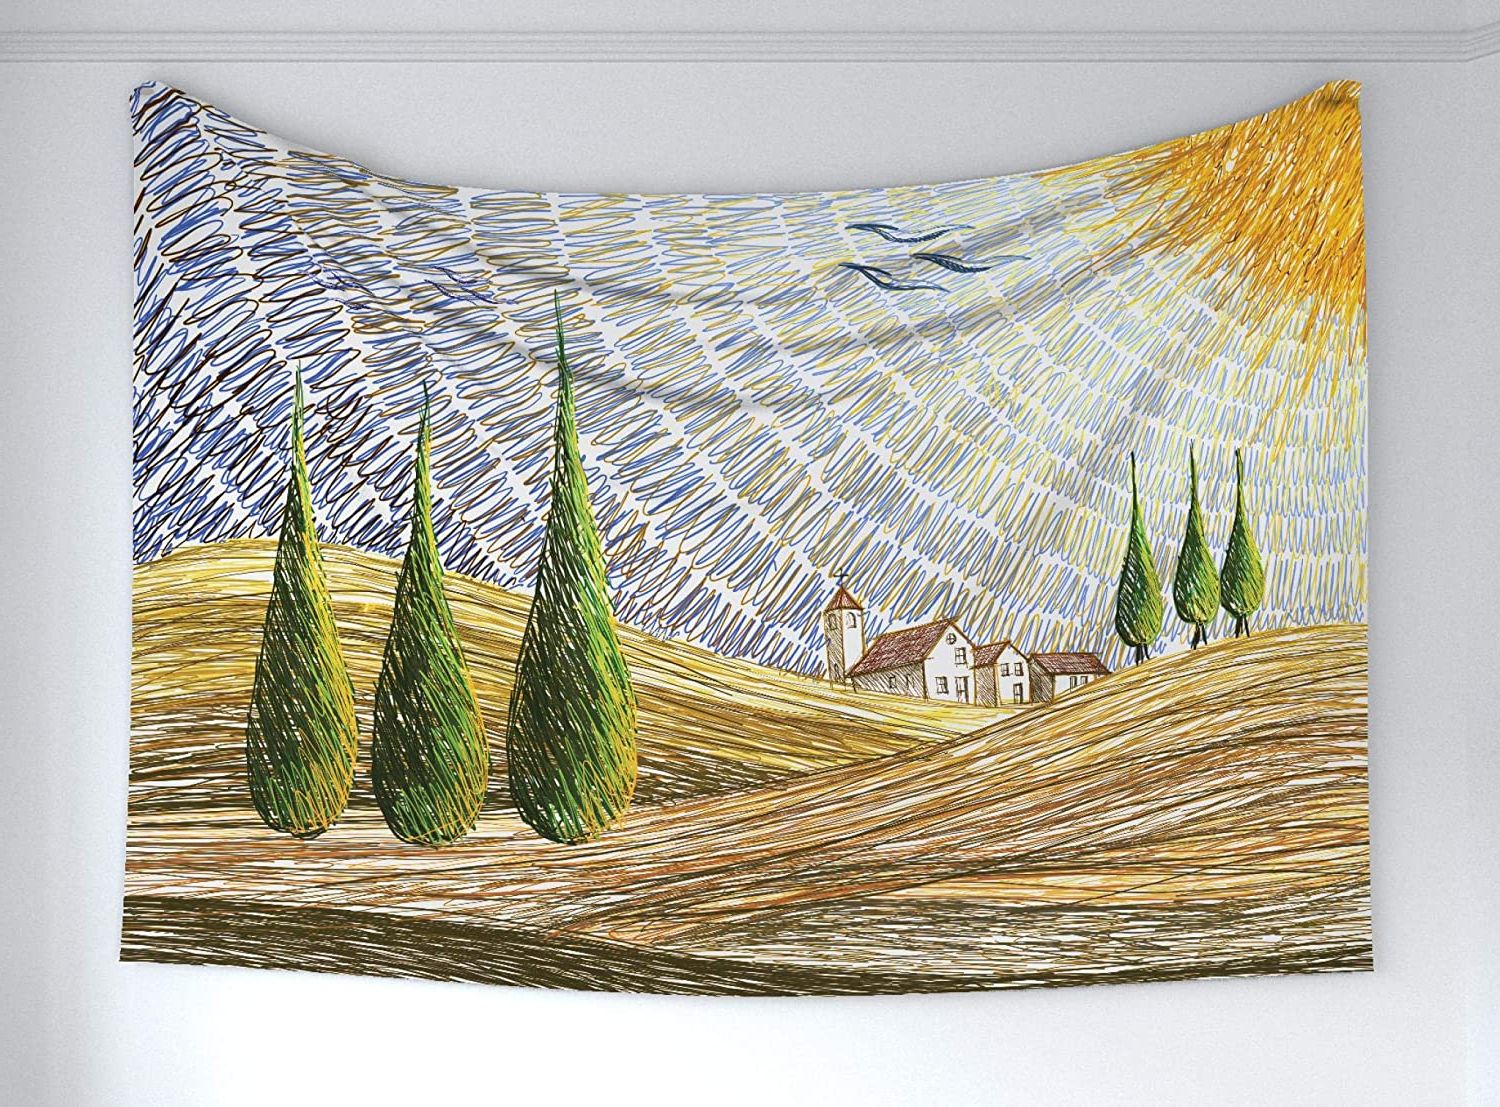 Blended Fabric Van Gogh Terrace Wall Hangings Within Most Popular Ambesonne Italian Tapestry, Van Gogh Style Italian Valley Rural Fields With  European Scenery Painting Print, Fabric Wall Hanging Decor For Bedroom (View 4 of 20)